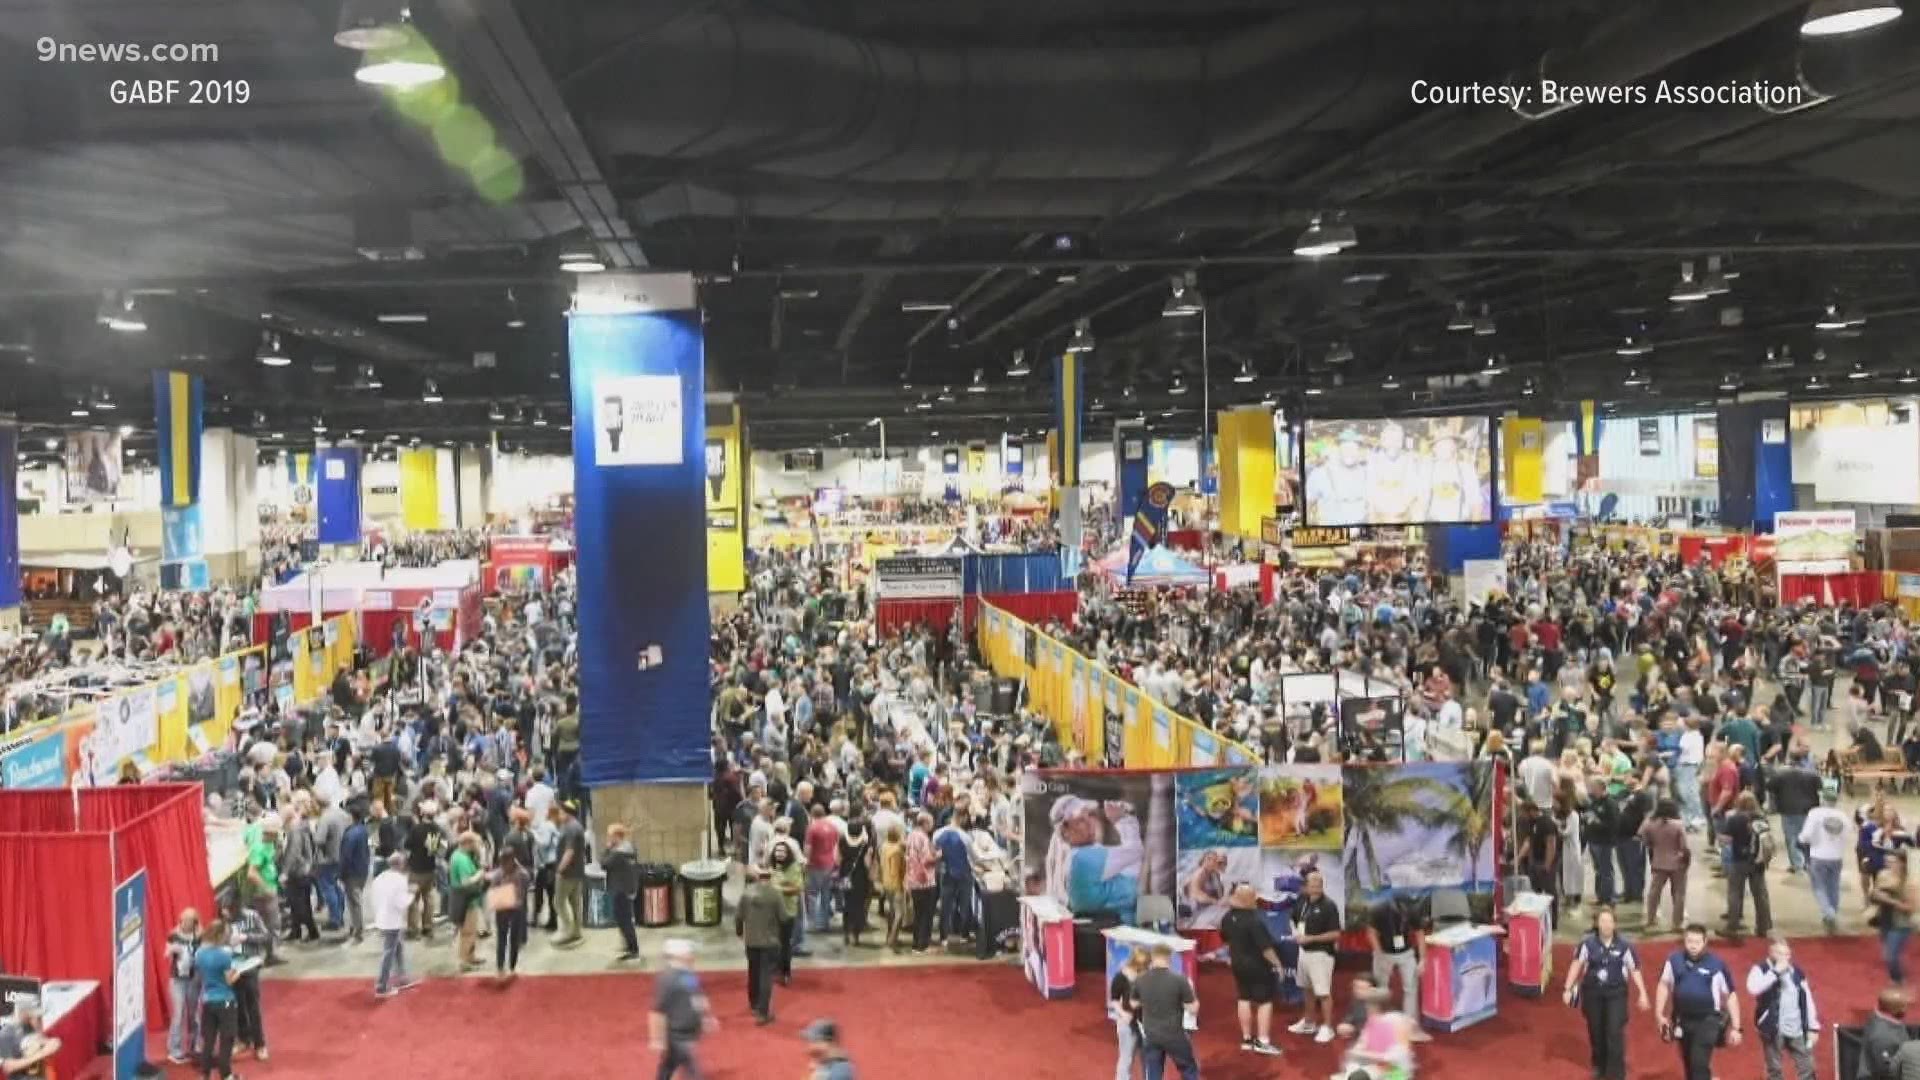 The 2020 Great American Beer Festival usually draws thousands to Denver, but this year it's going virtual due to the COVID-19 pandemic.